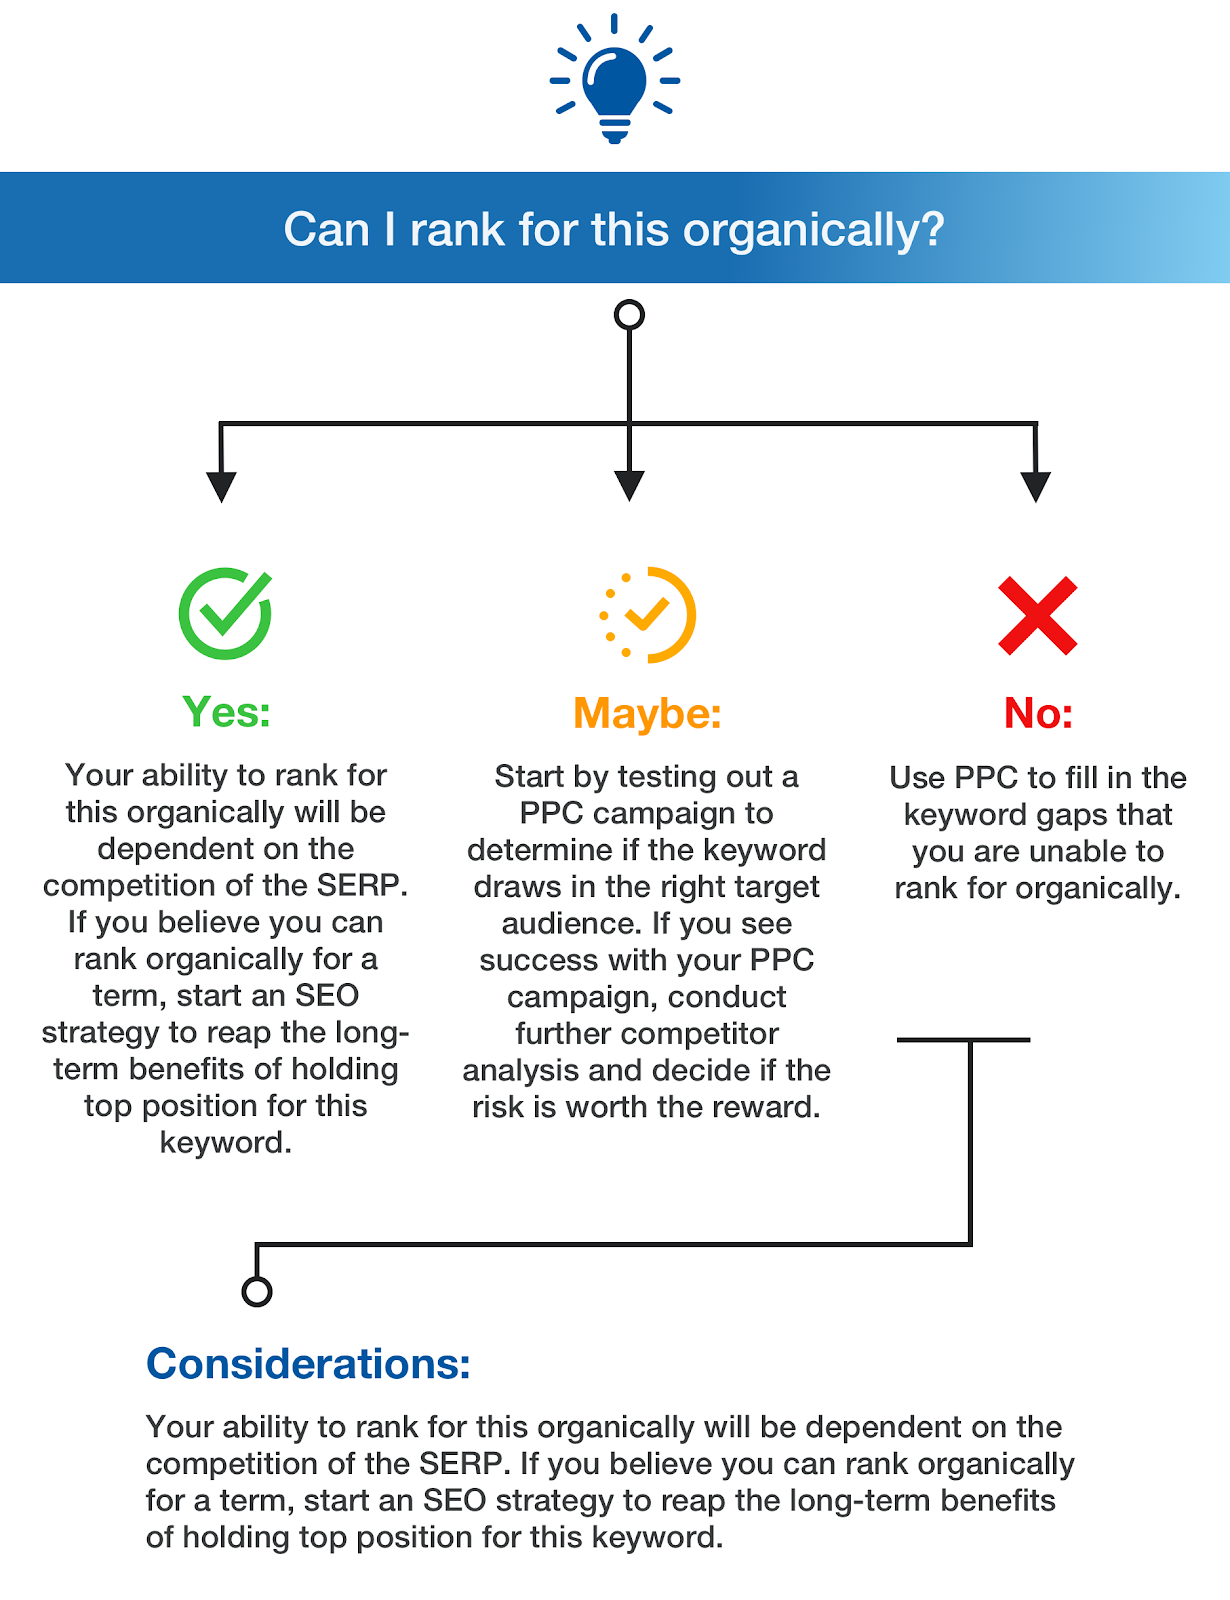 infographic showing when you should focus on PPC vs SEO